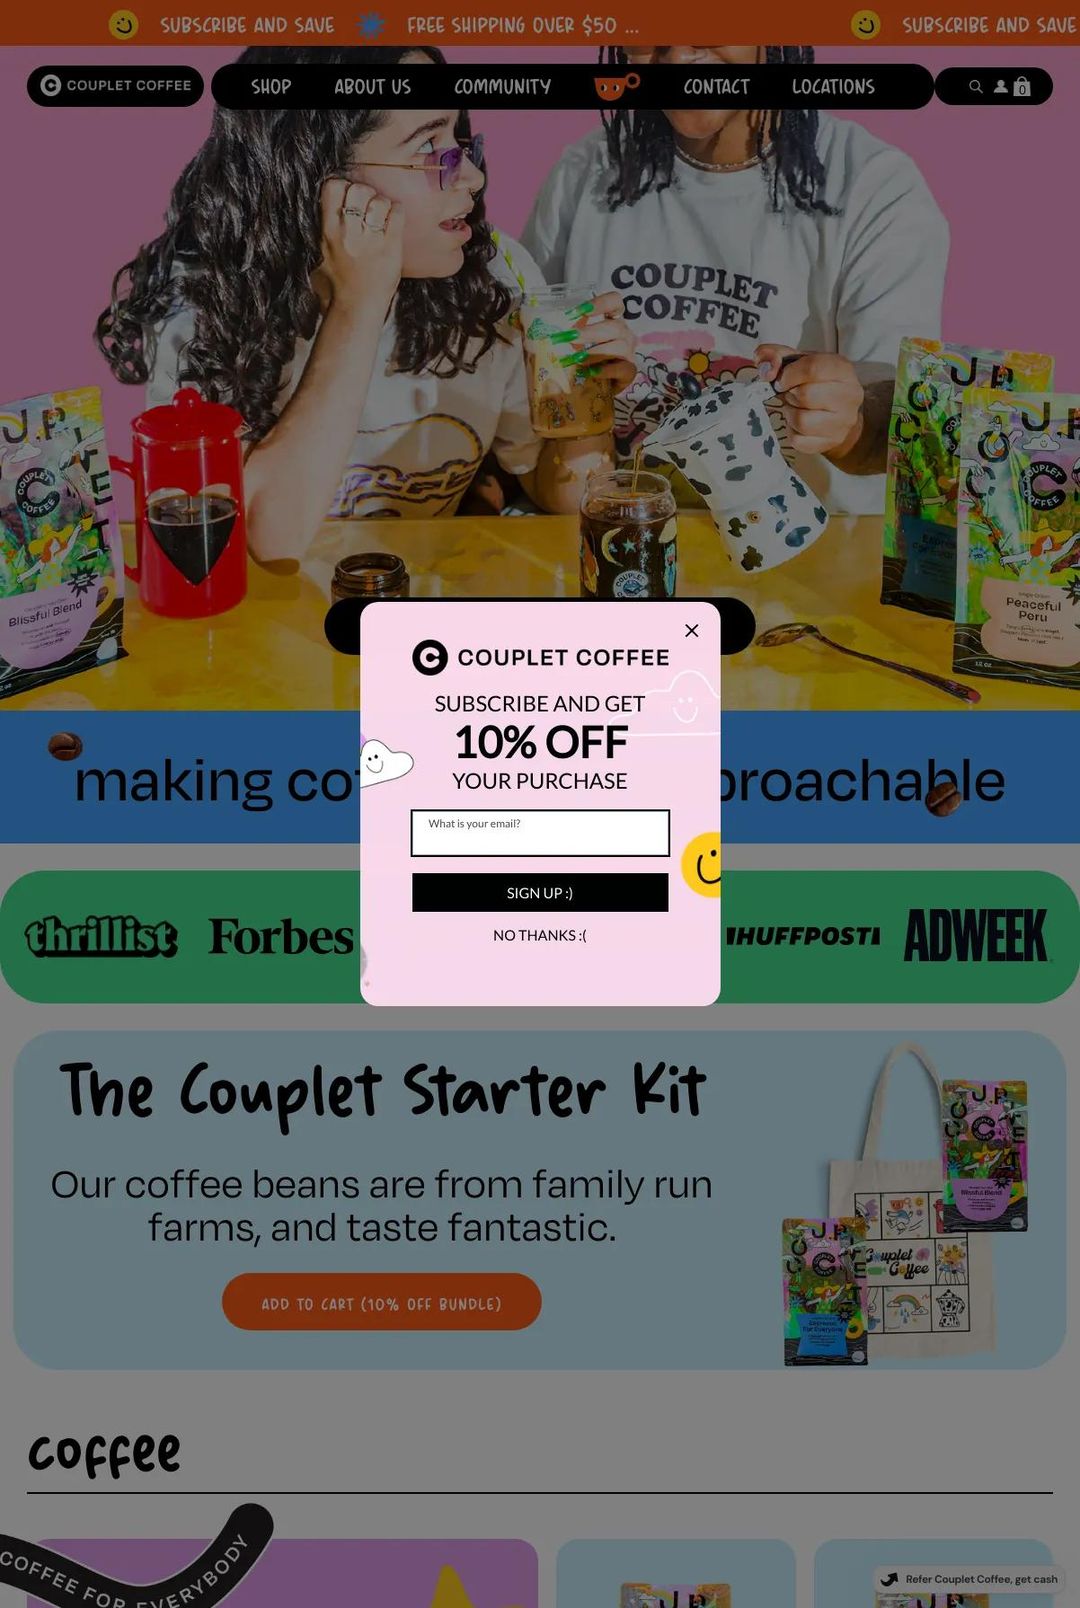 Screenshot 1 of Couplet Coffee (Example Shopify Website)